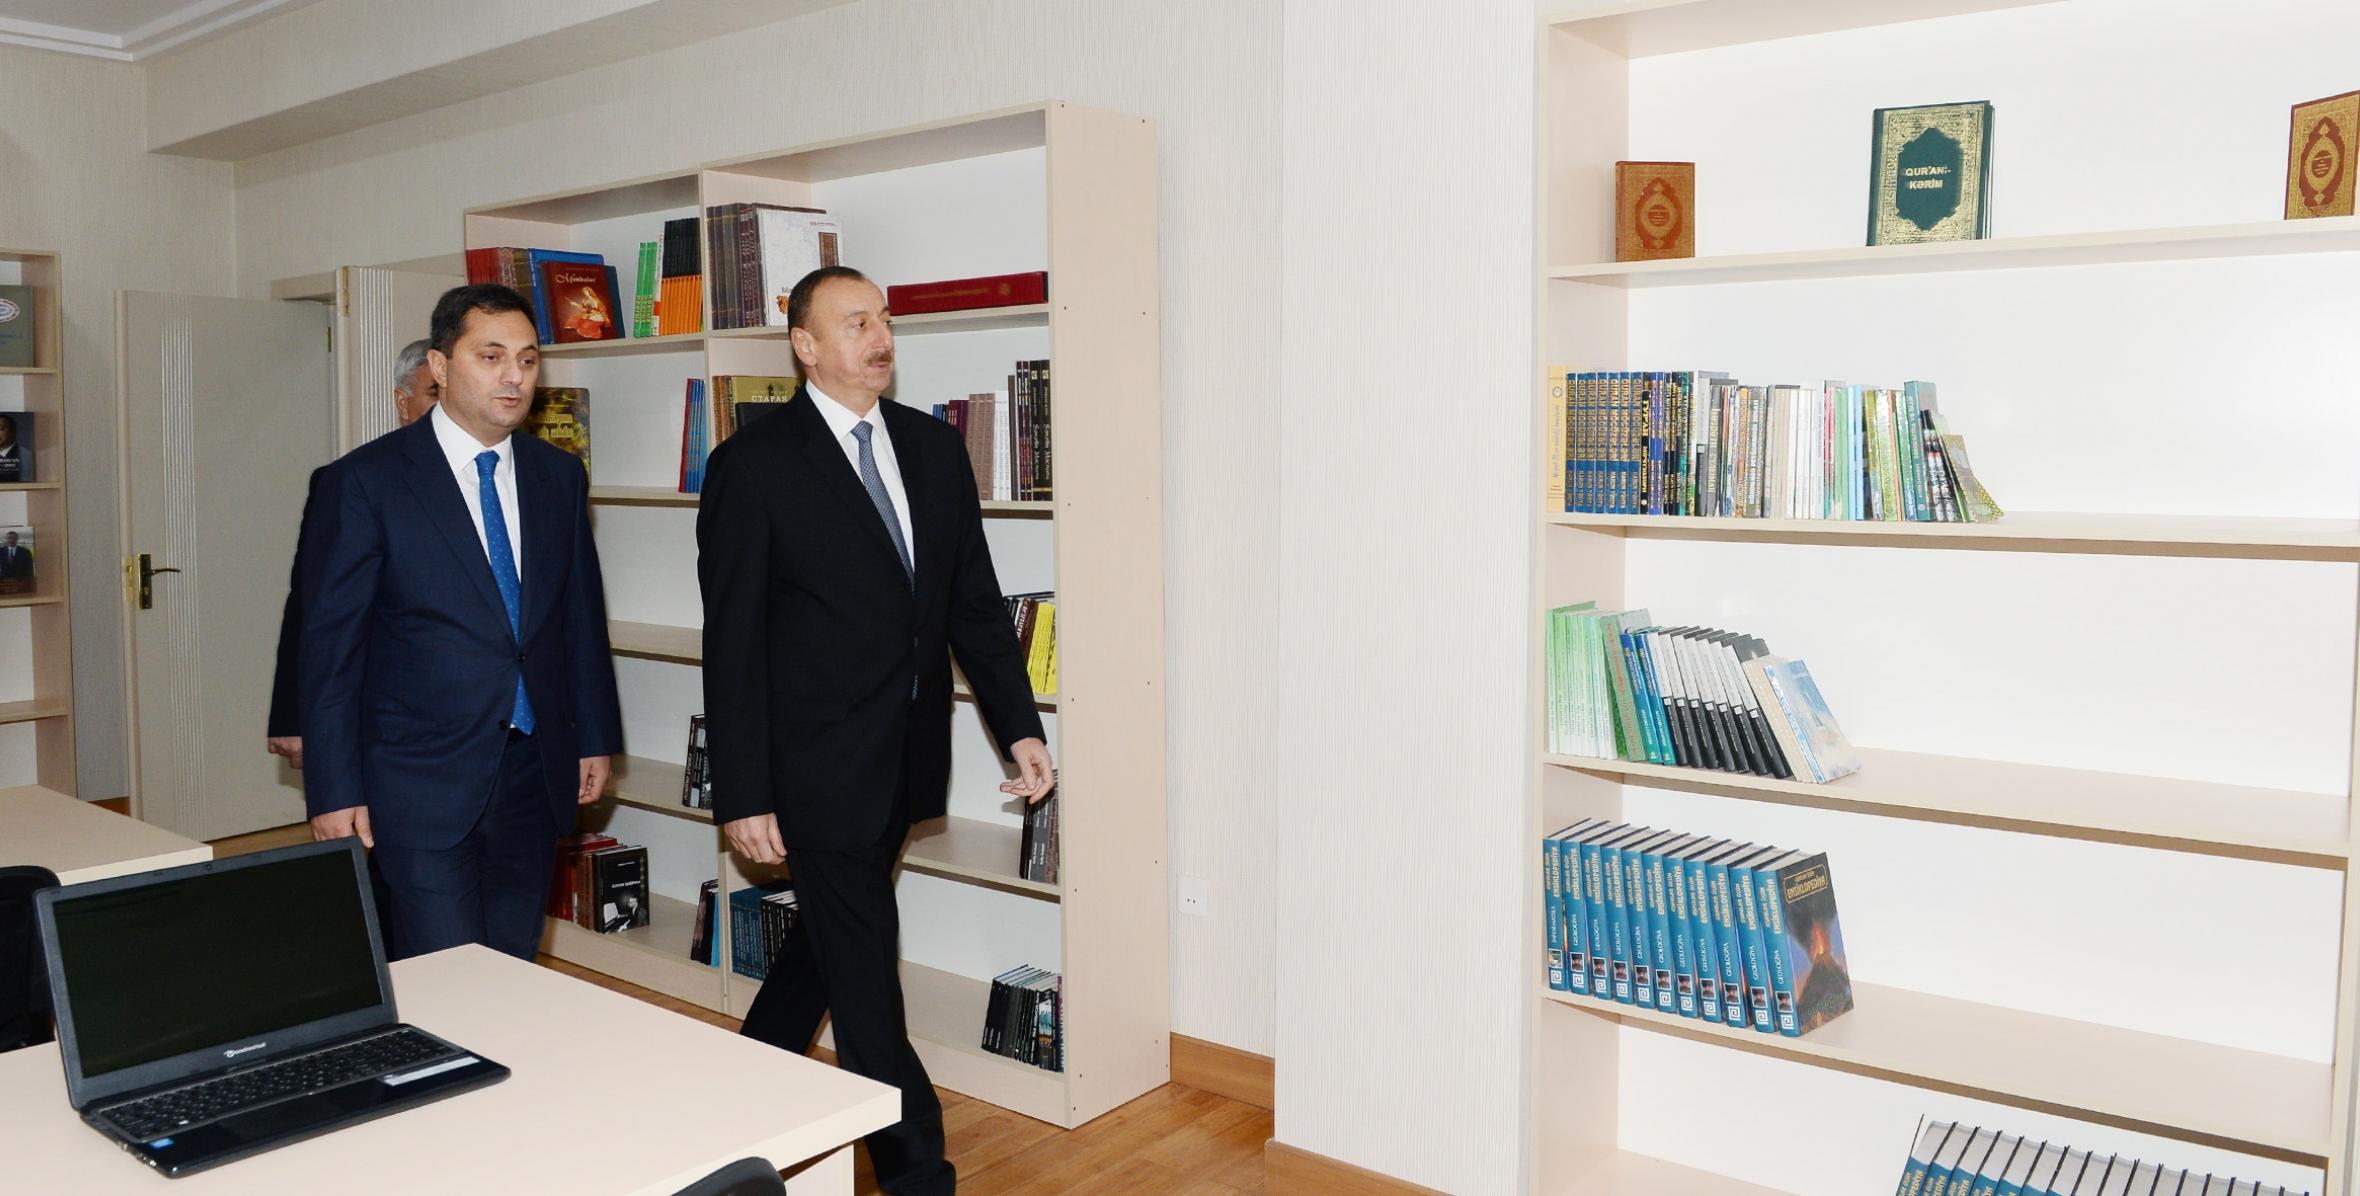 Ilham Aliyev reviewed the Cultural House in the city of Sabirabad after major overhaul